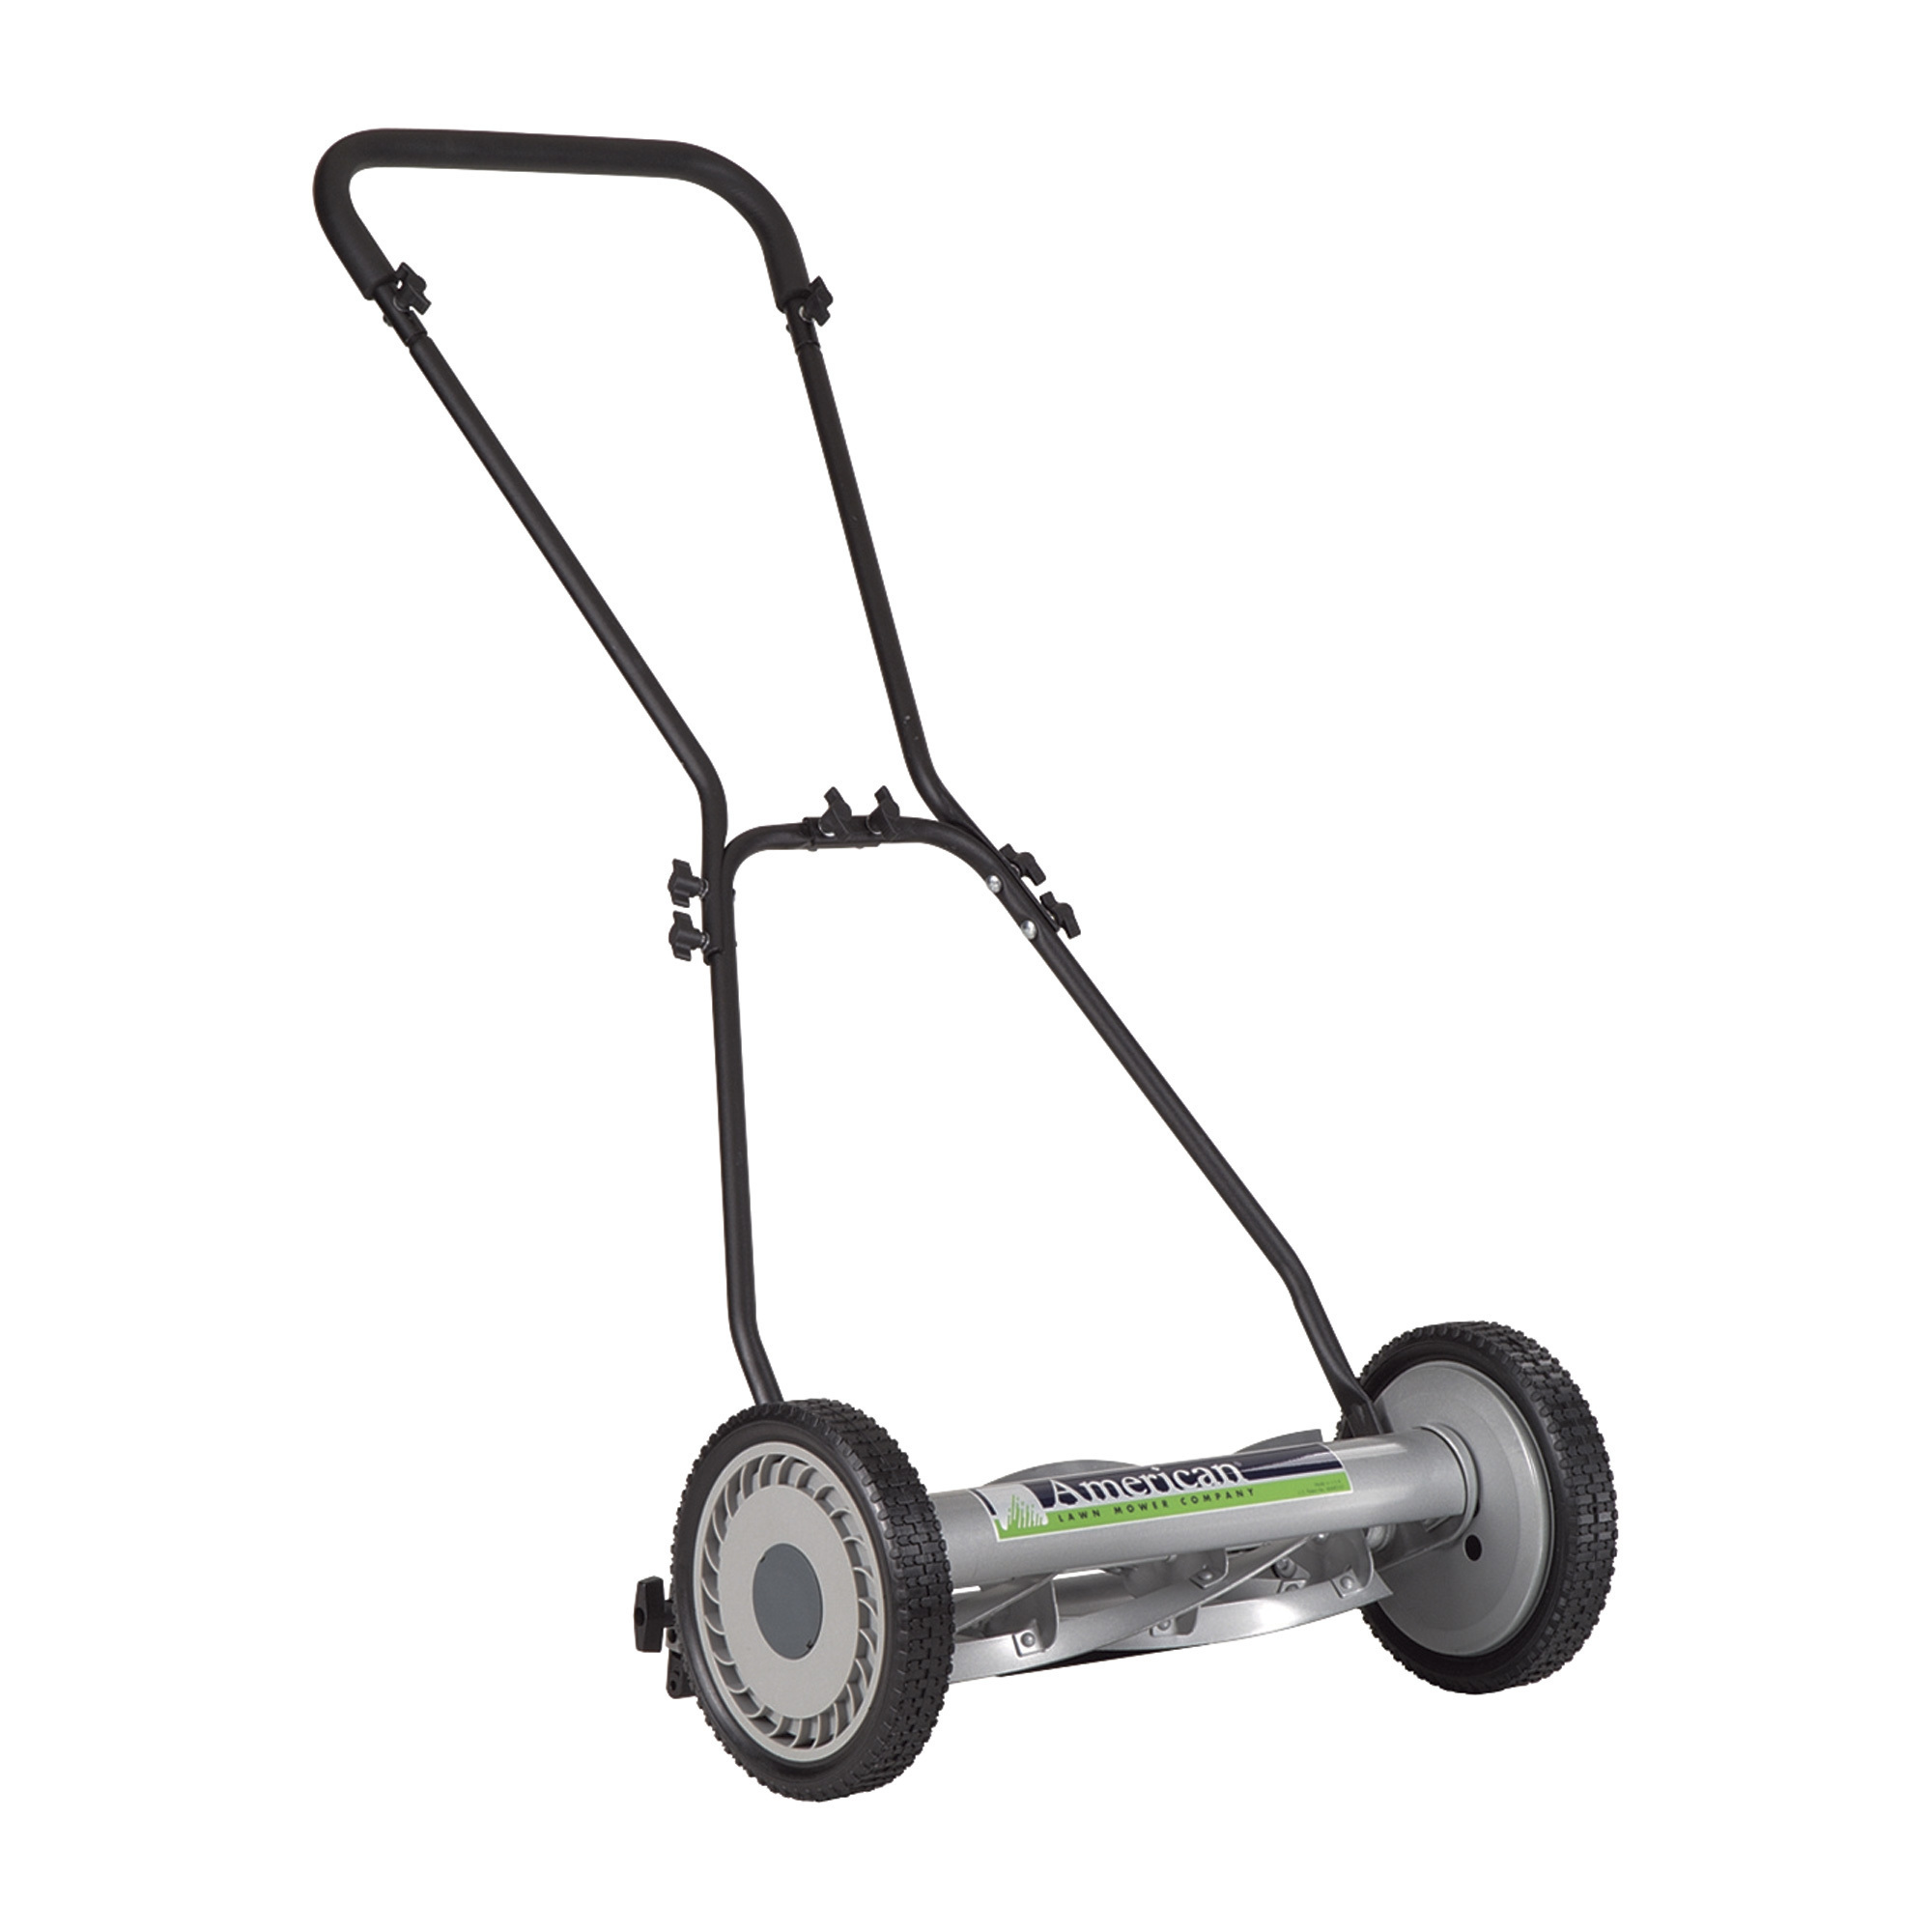 Reviews for American Lawn Mower Company 16 in. 5-Blade Manual Walk